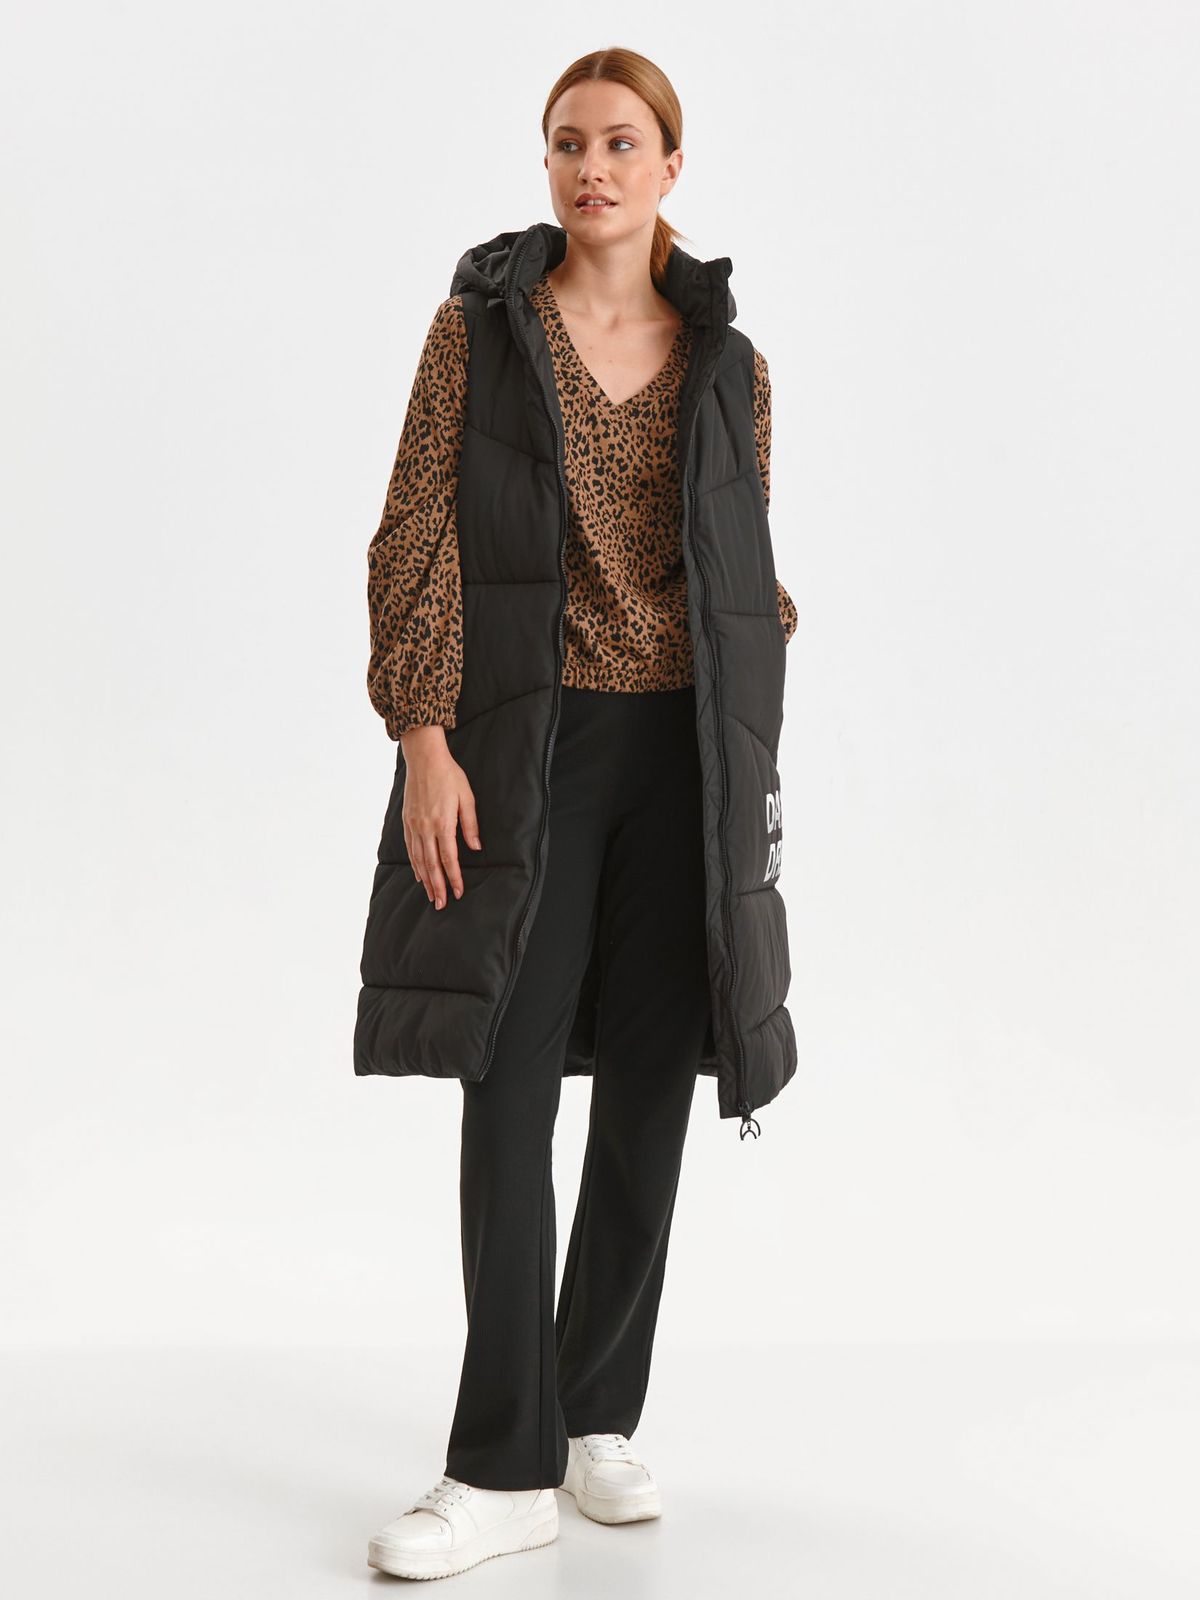 Black gilet from slicker with pockets